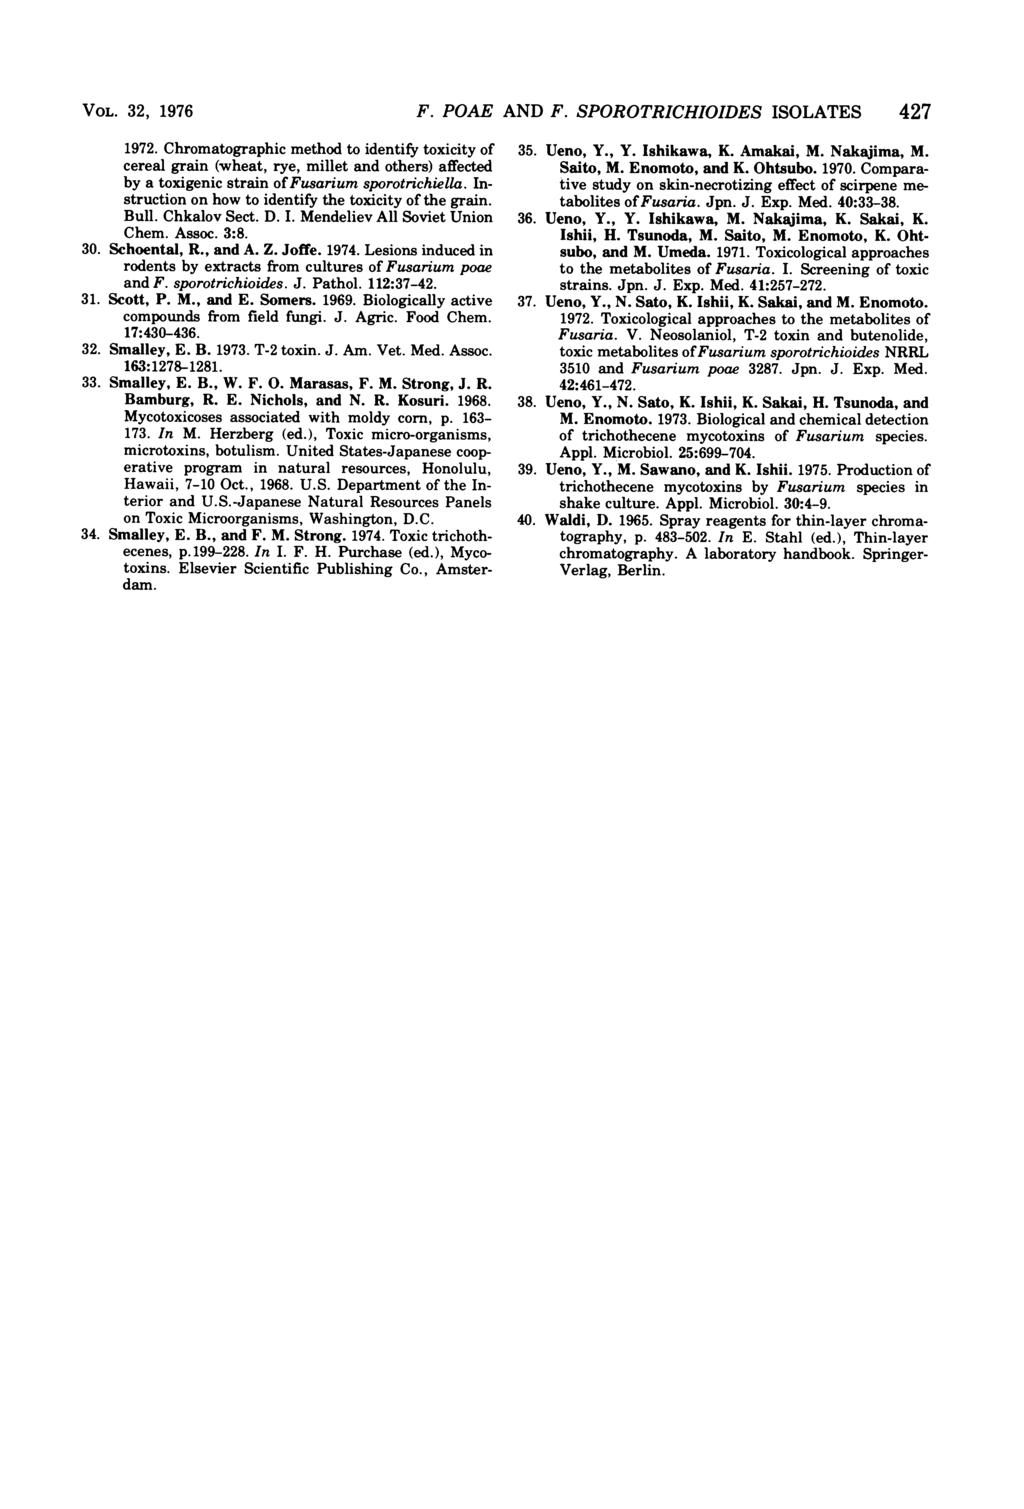 VOL. 32, 1976 1972. Chromatographic method to identify toxicity of cereal grain (wheat, rye, millet and others) affected by a toxigenic strain offusarium sporotrichiella.